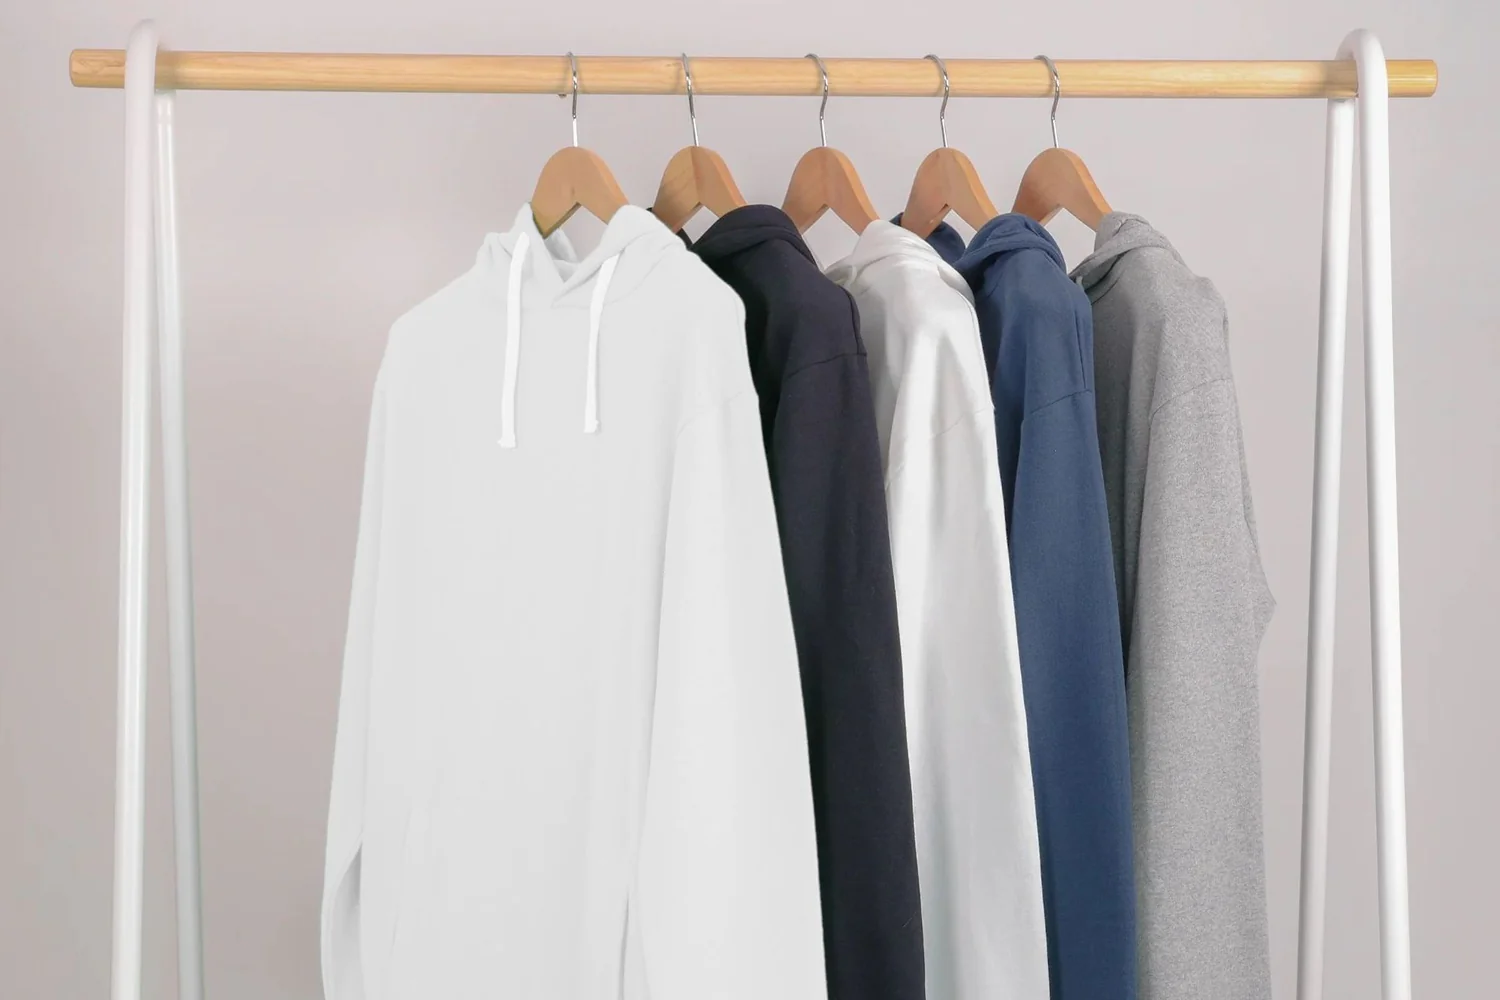 Your Style Game Yeezy Gap Hoodies